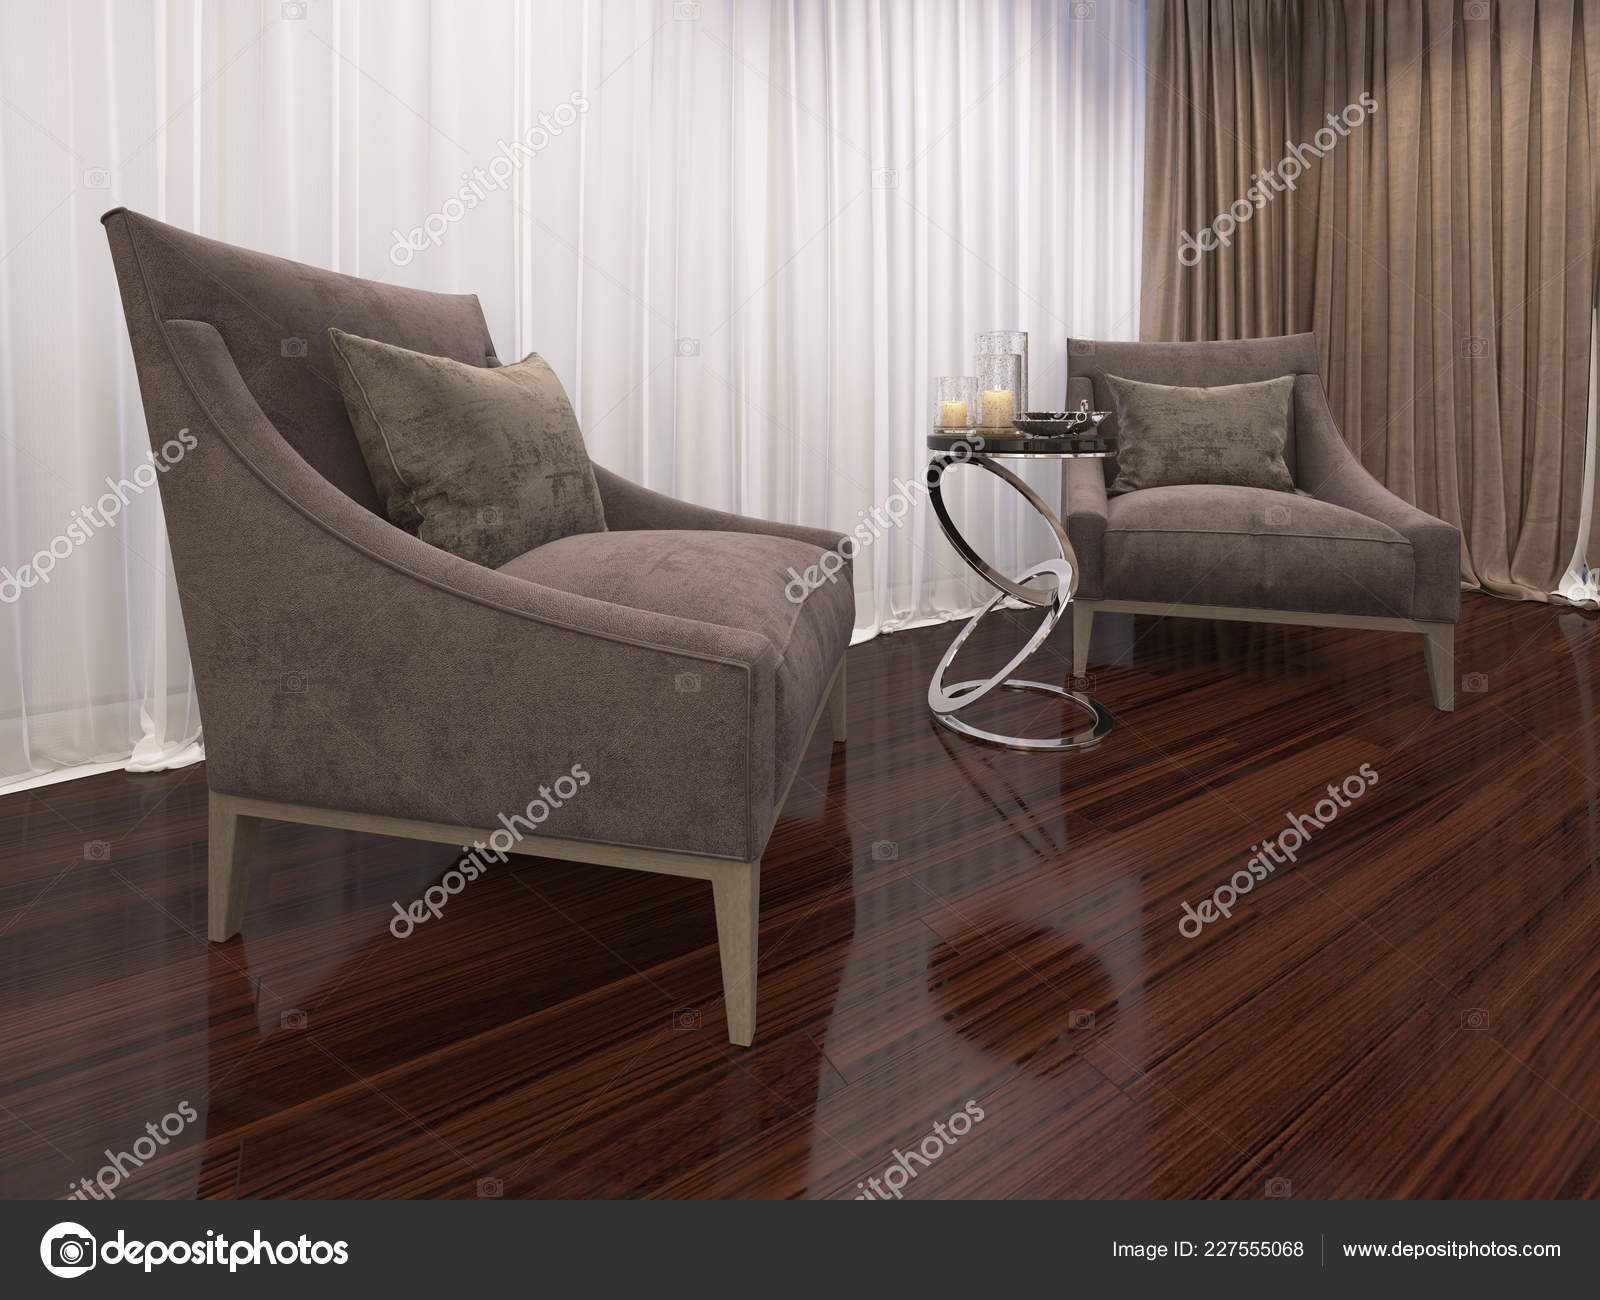 Two Luxurious Soft Armchairs Evening, Art Deco Style Laminate Flooring